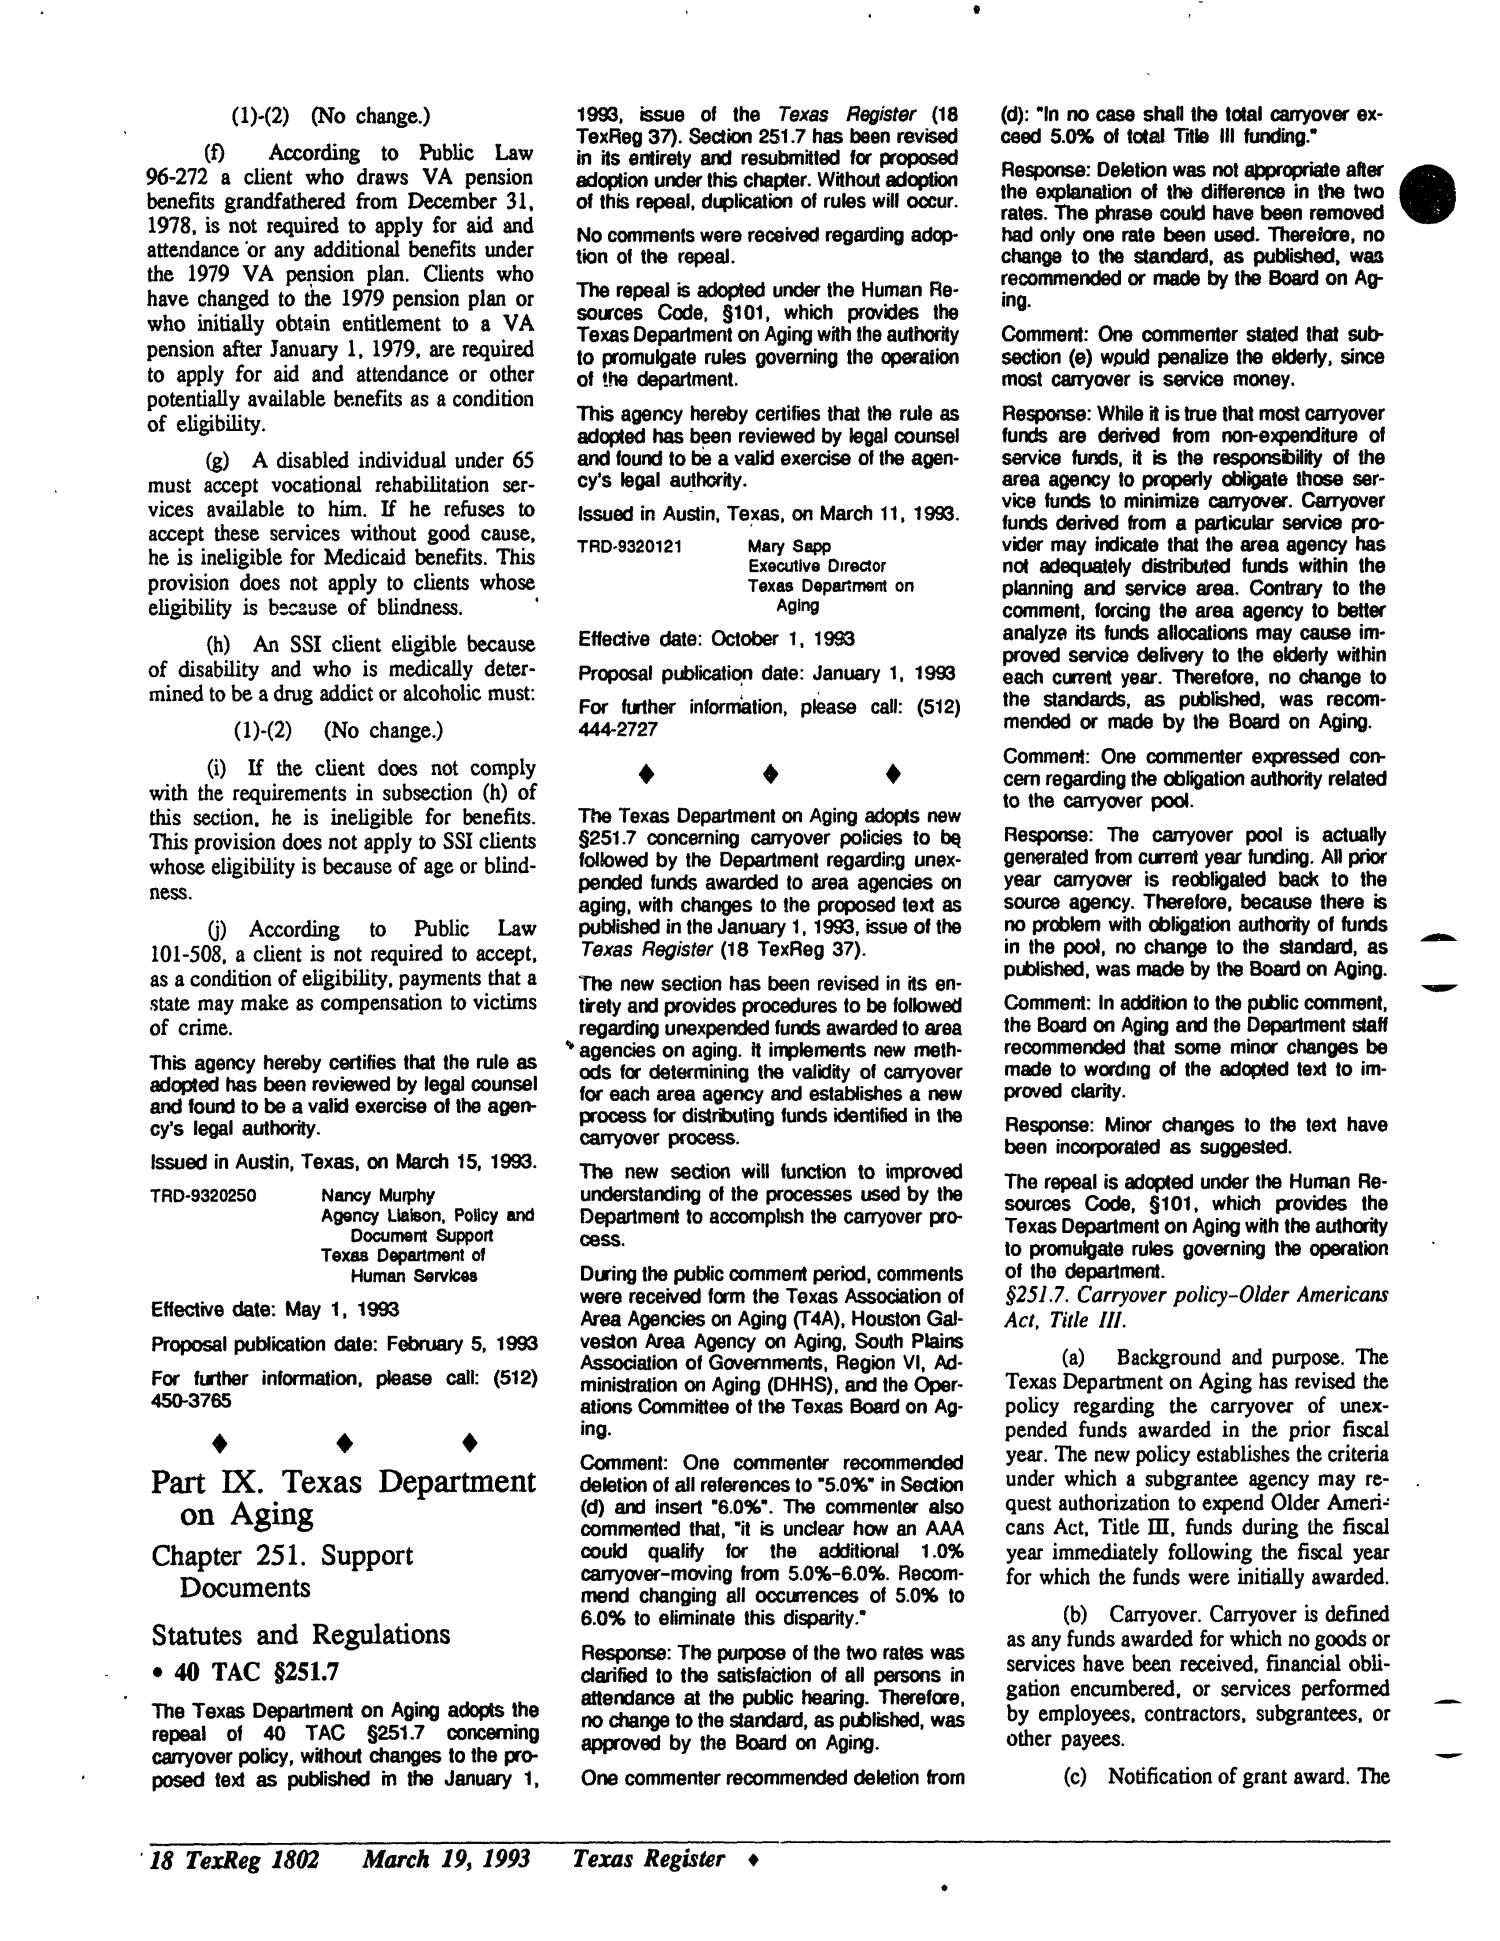 Texas Register, Volume 18, Number 22, Pages 1783-1825, March 19, 1993
                                                
                                                    1802
                                                